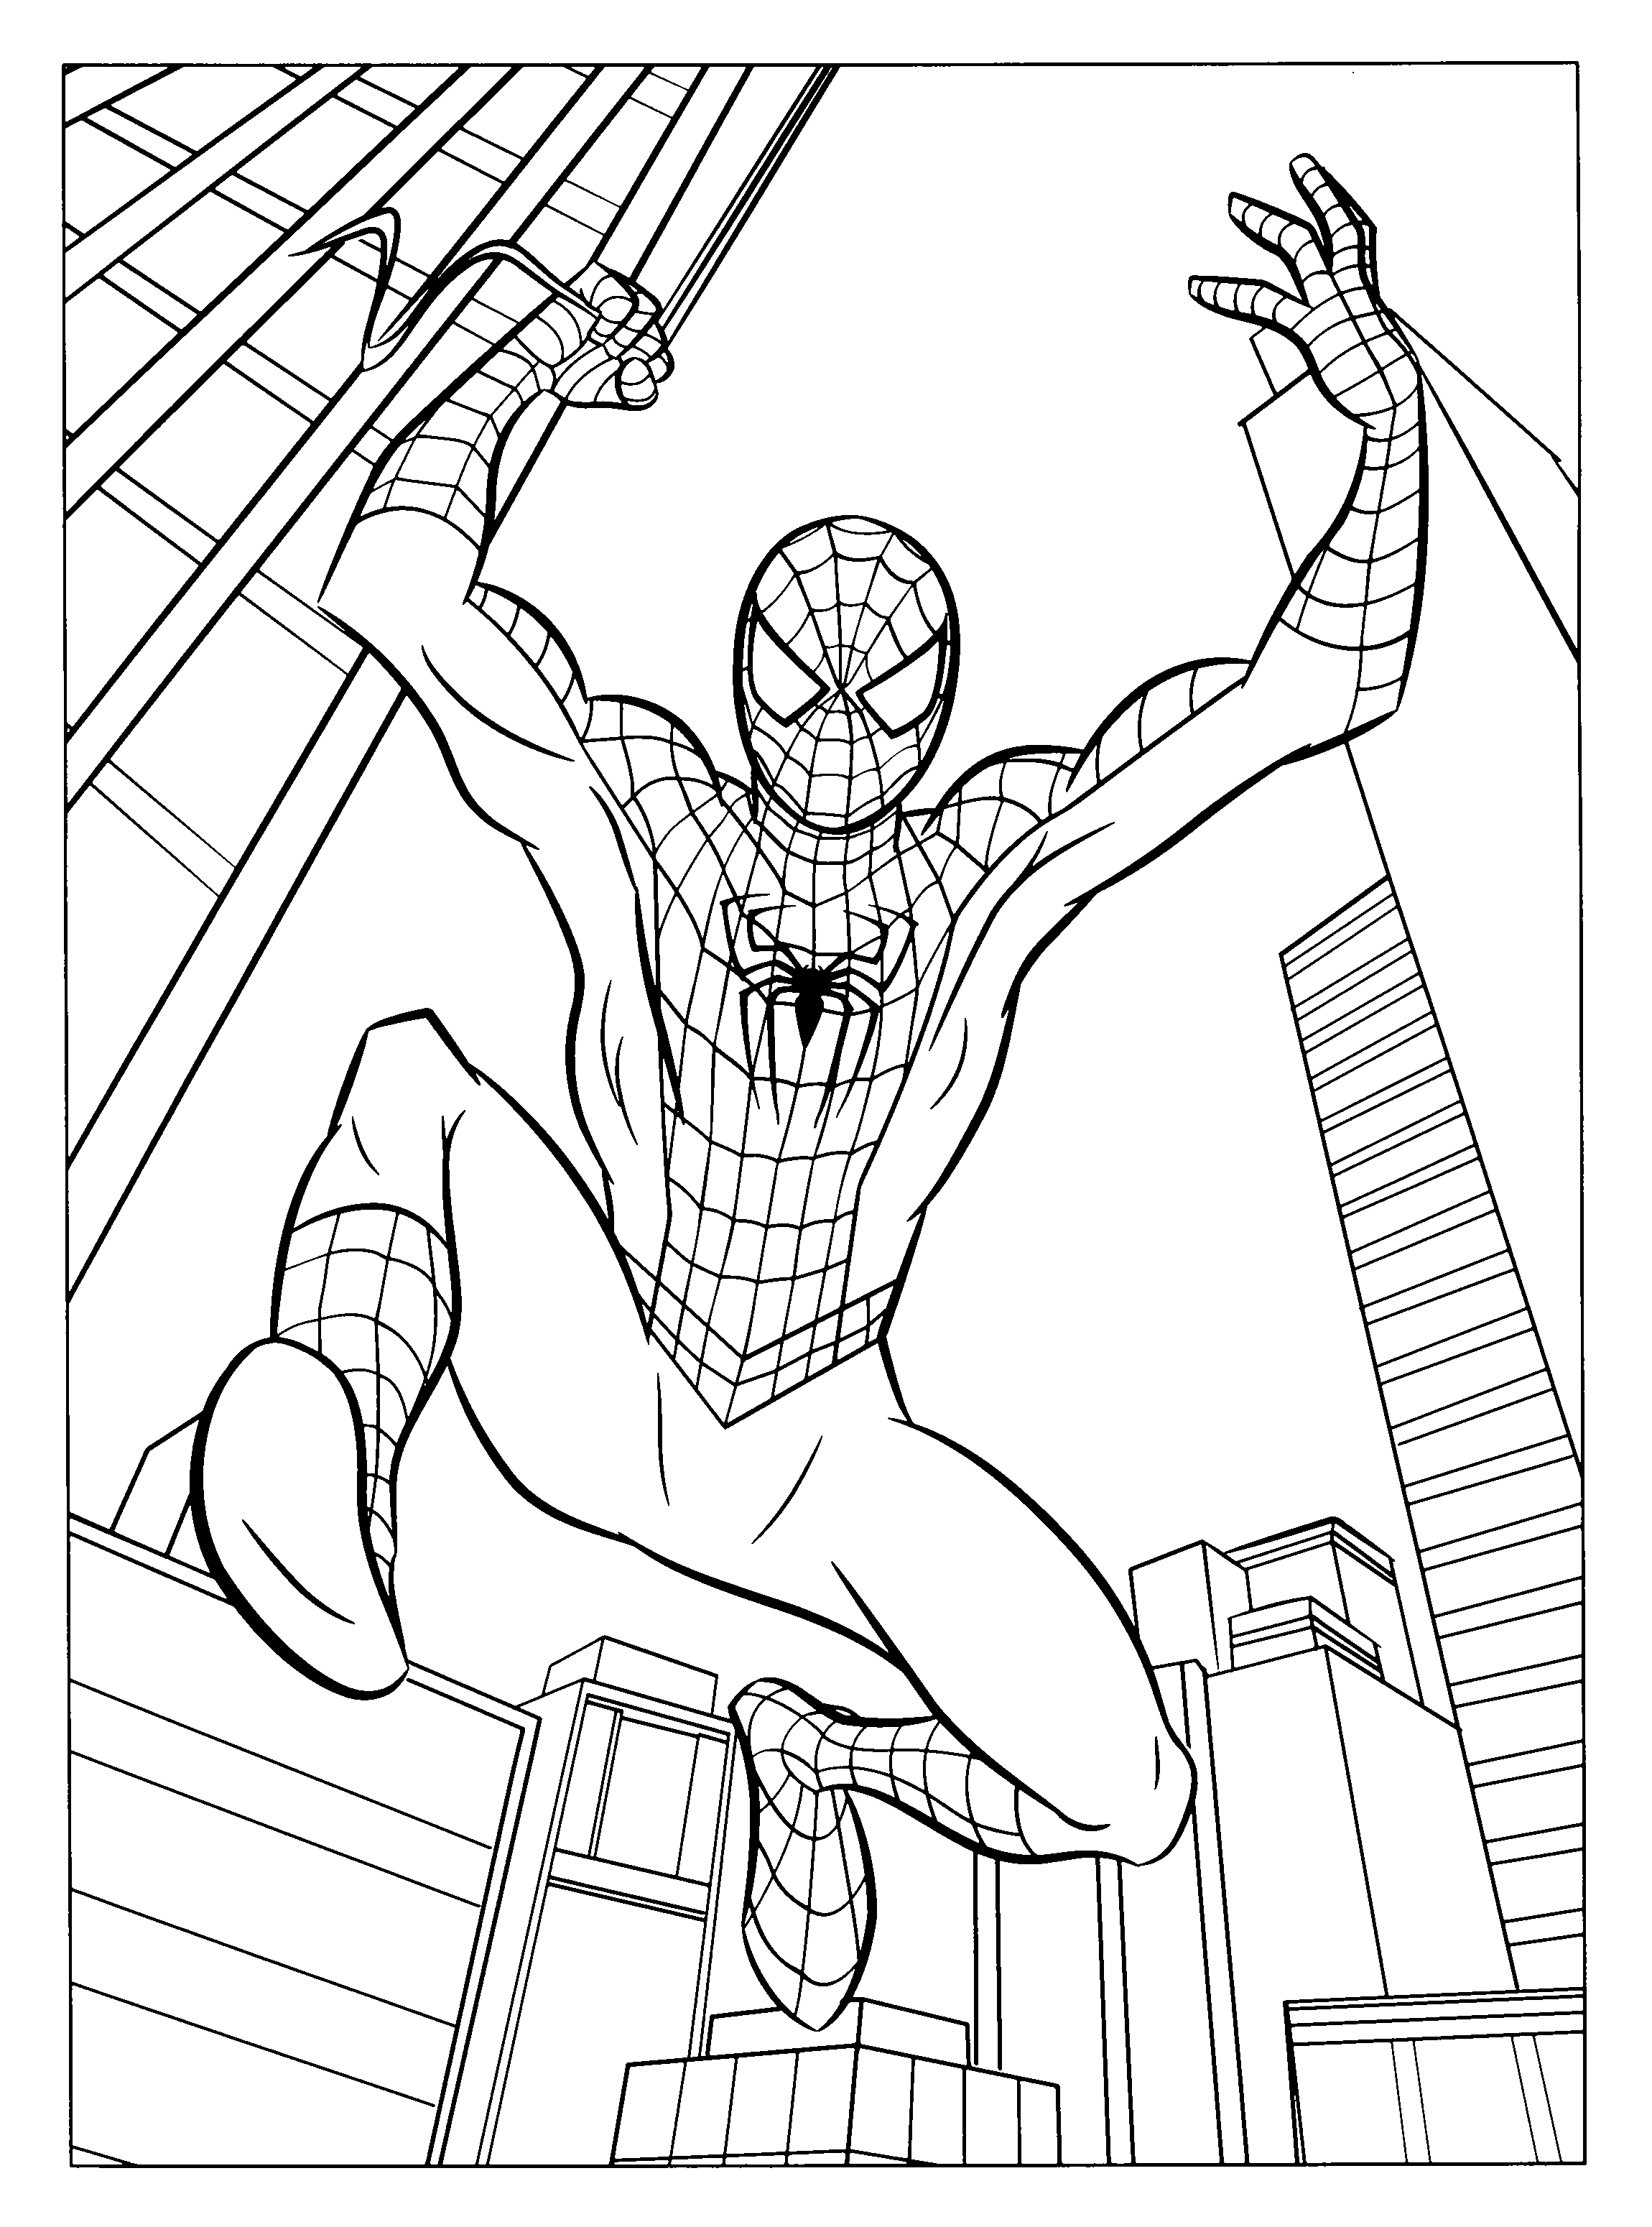 Coloring pages for your kids - page 13 : Printable Spiderman ...